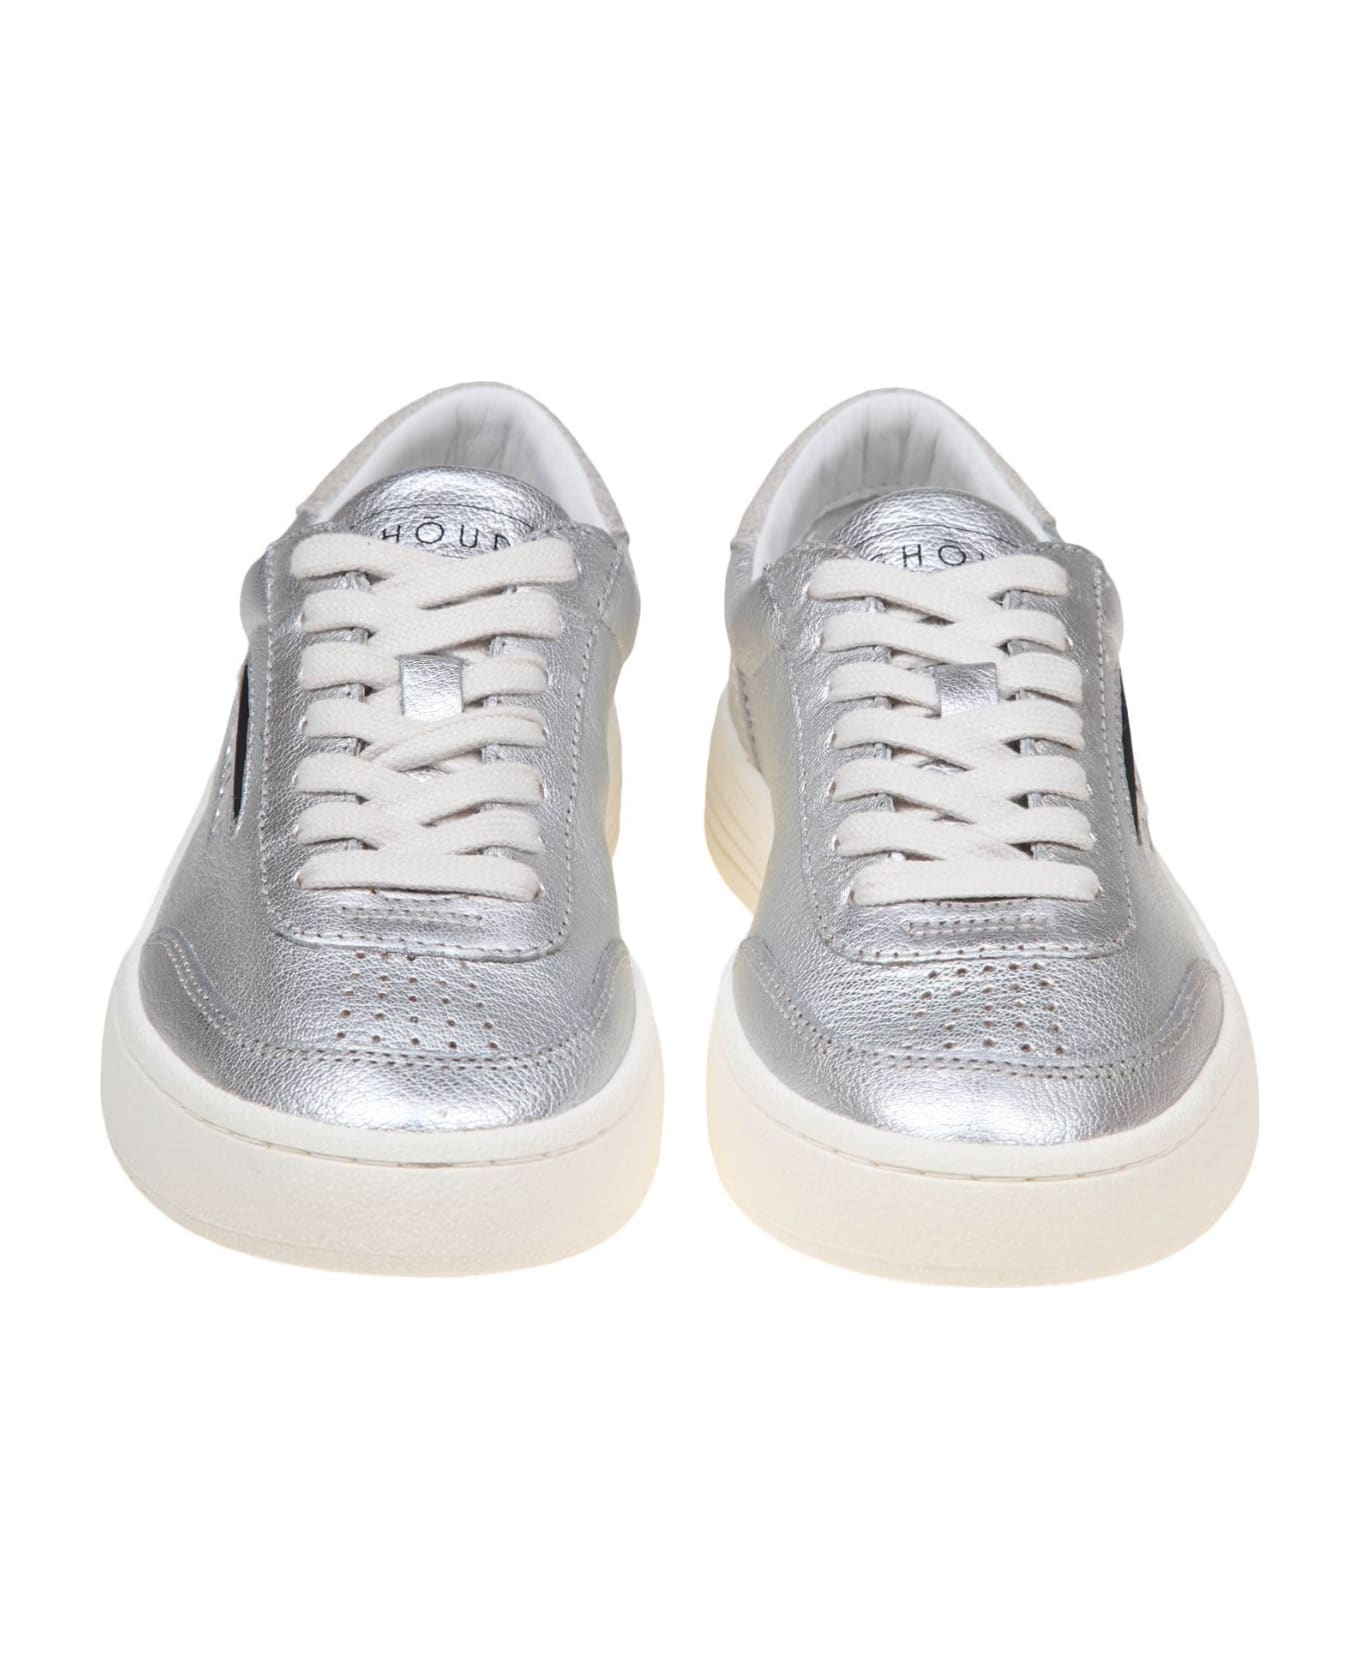 GHOUD Lido Low Sneakers In Silver Leather - Silver